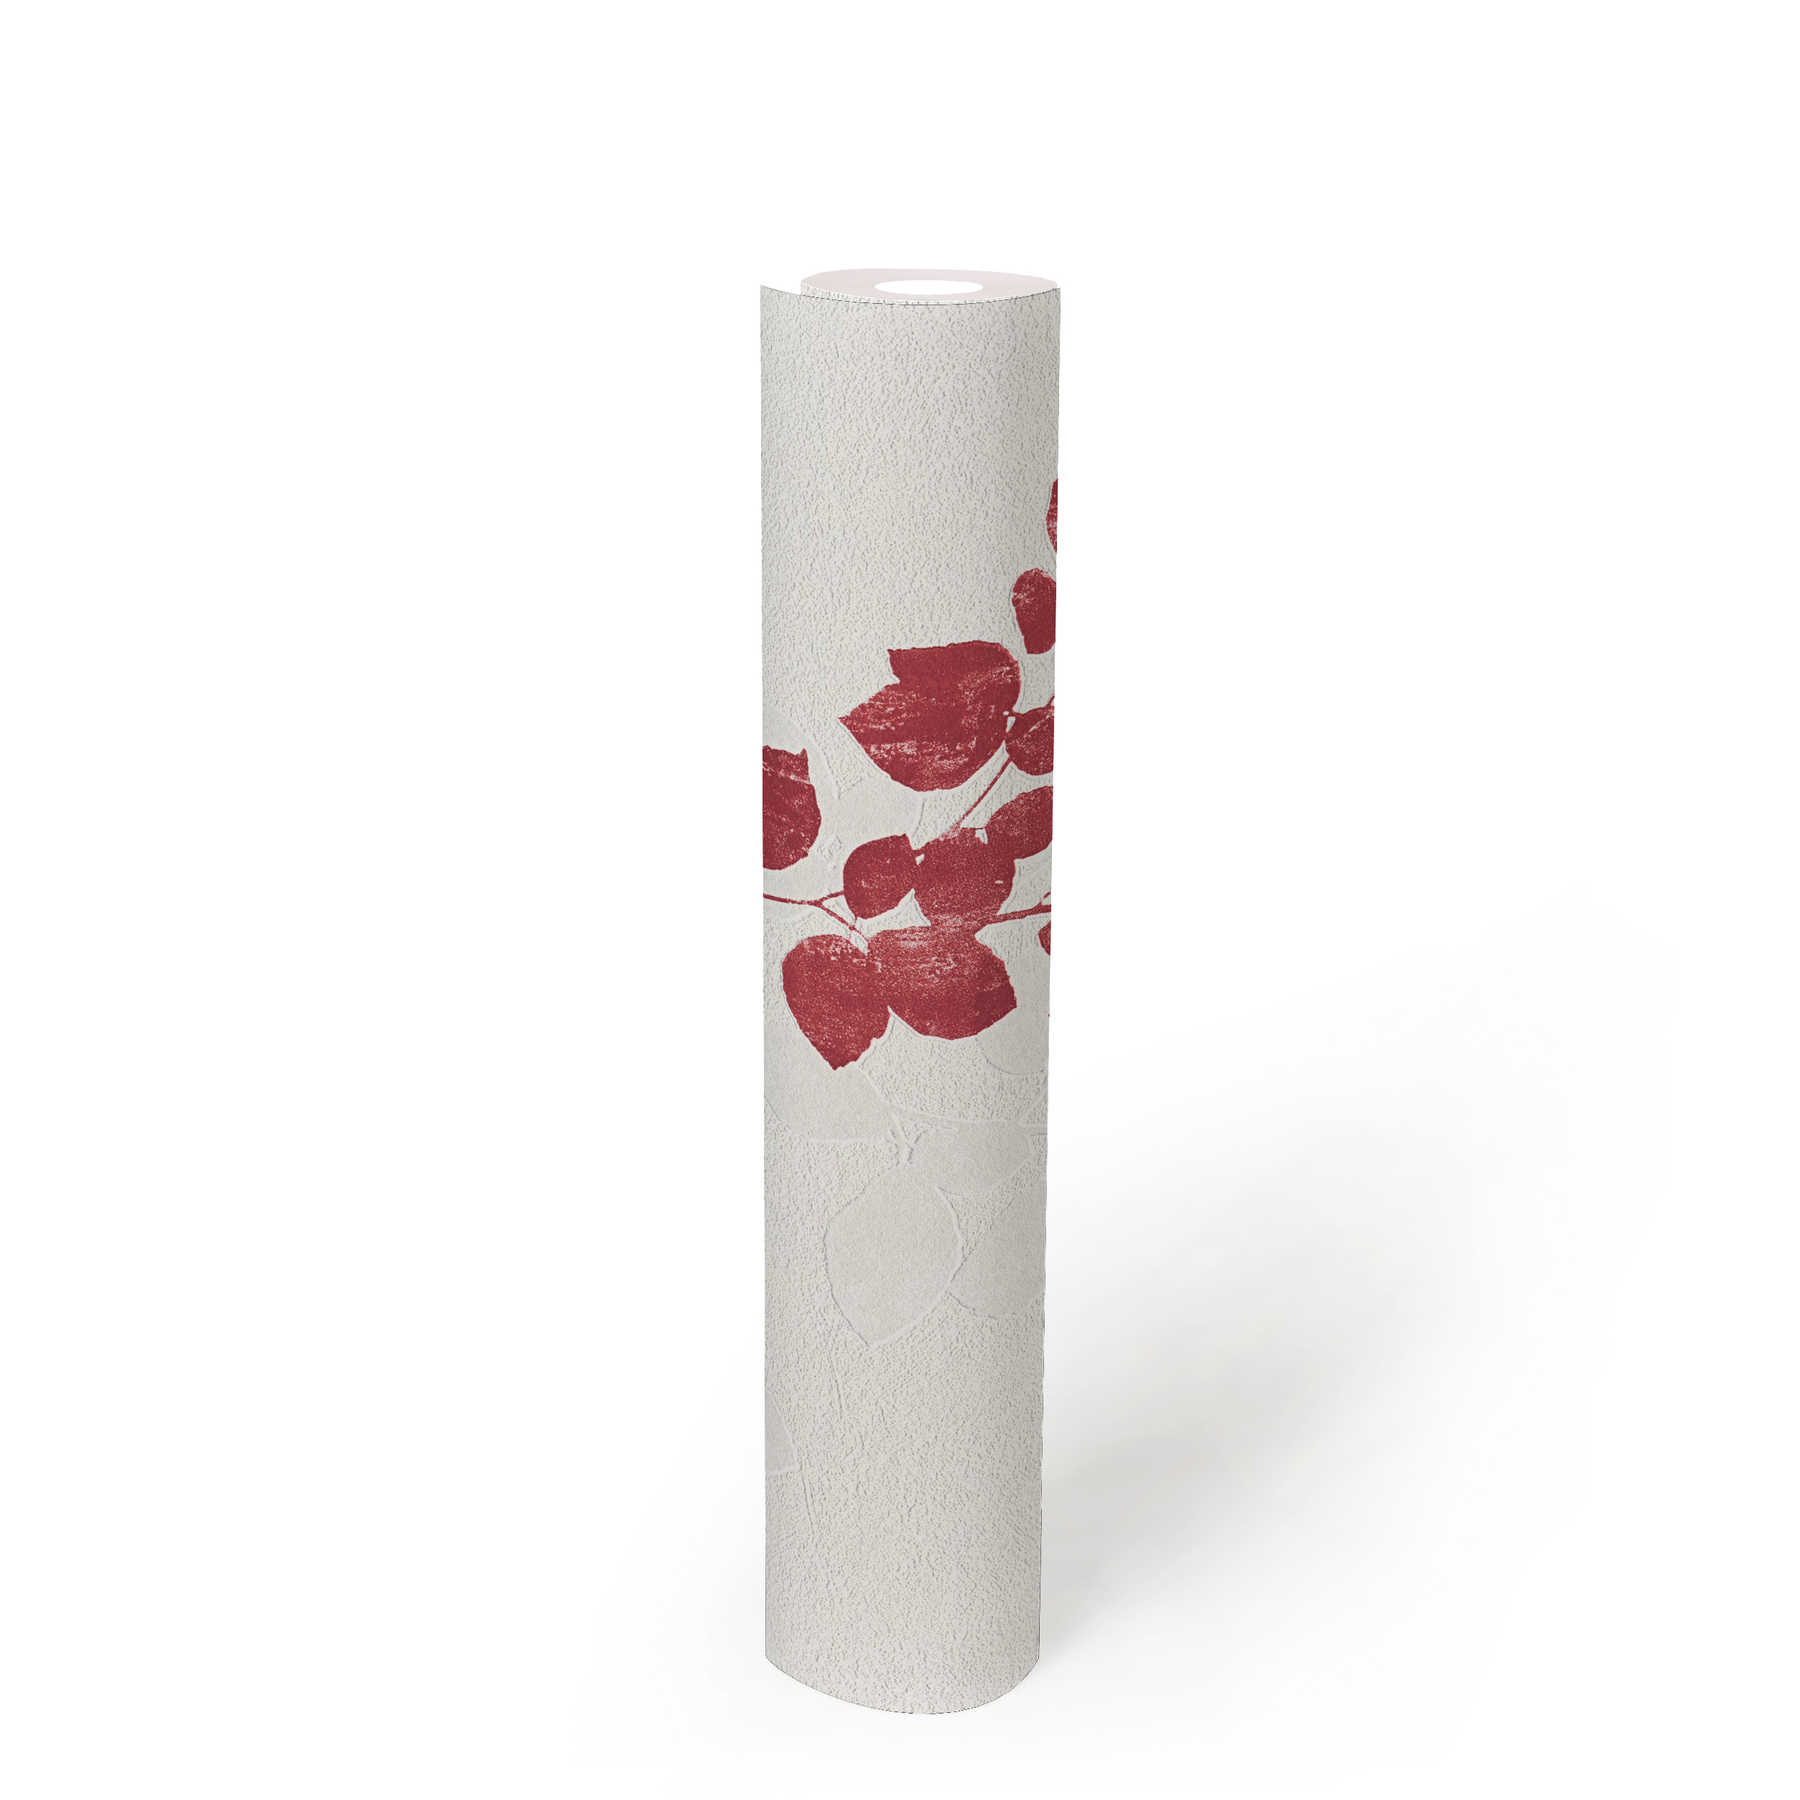             Plaster optics wallpaper with leaf tendrils & texture effect - cream, red
        